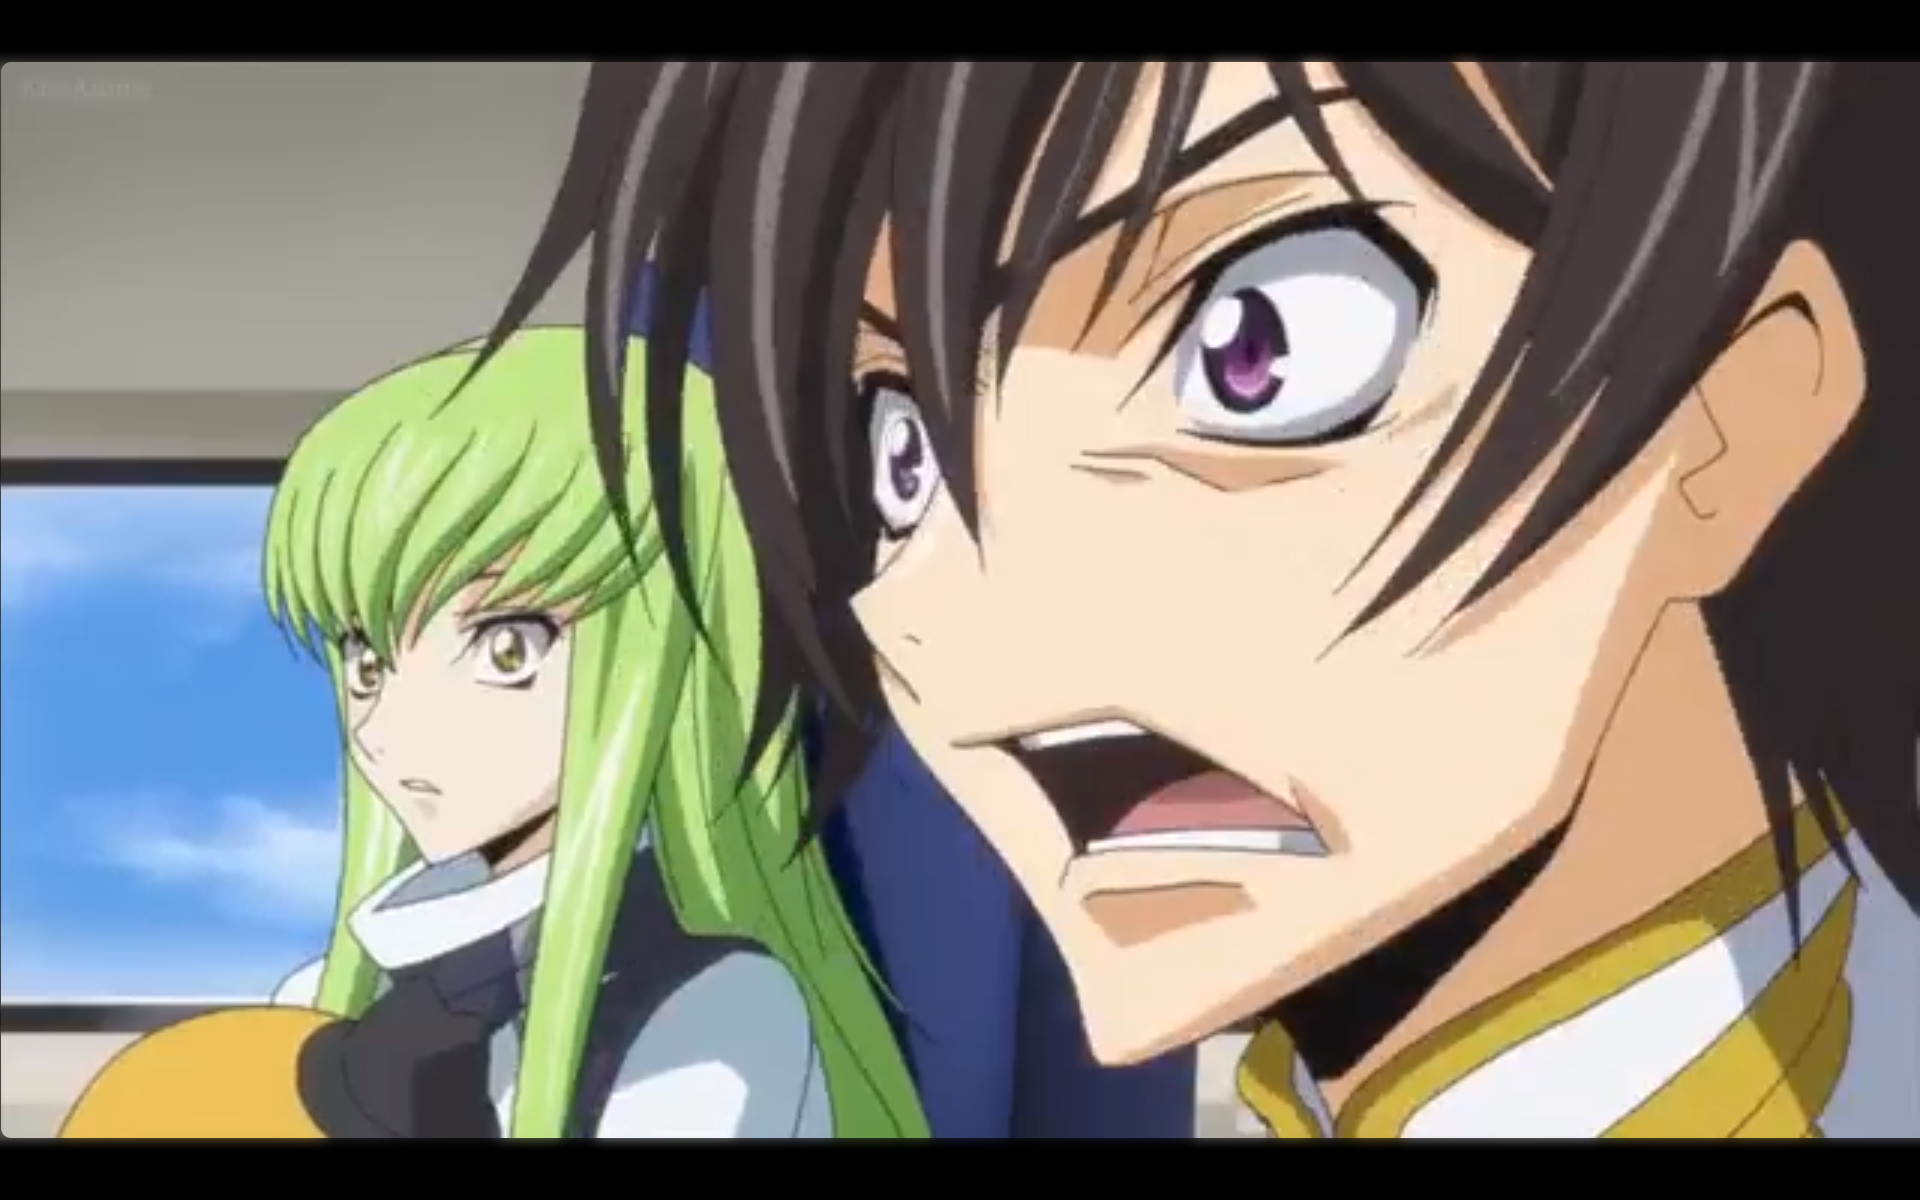 lelouch takes over the world